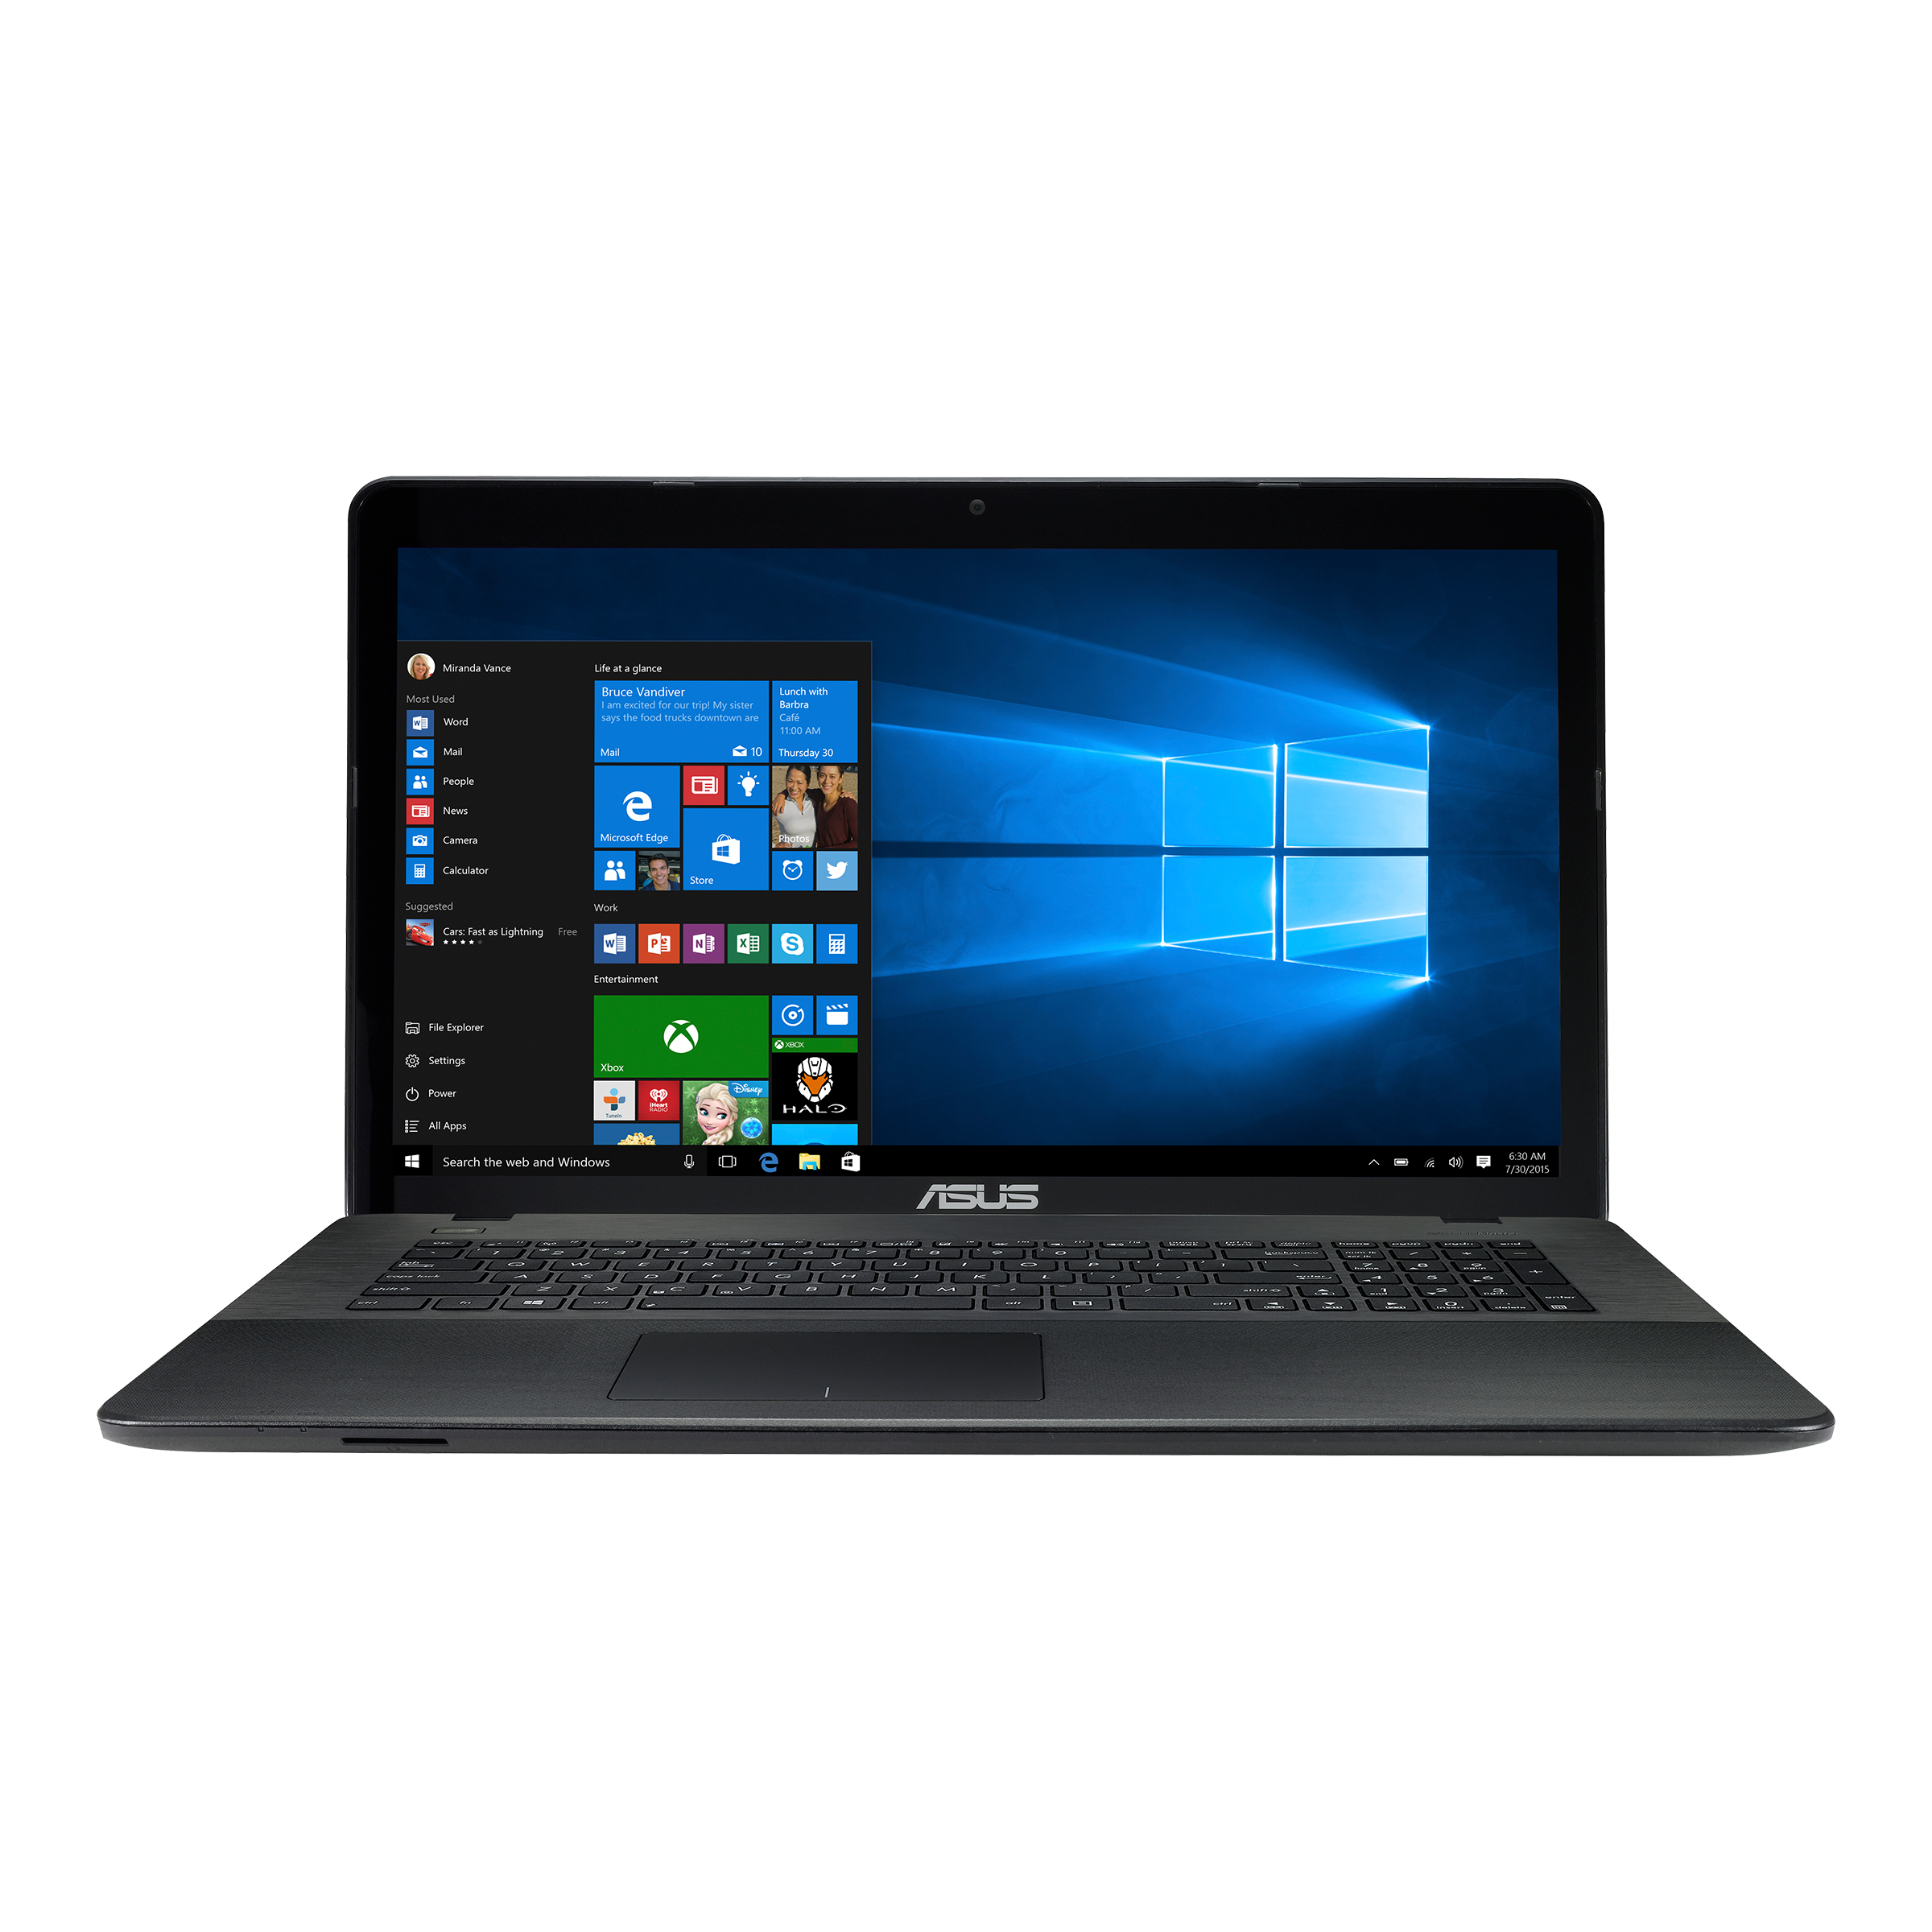 ASUS X751｜Laptops For Home｜ASUS Global